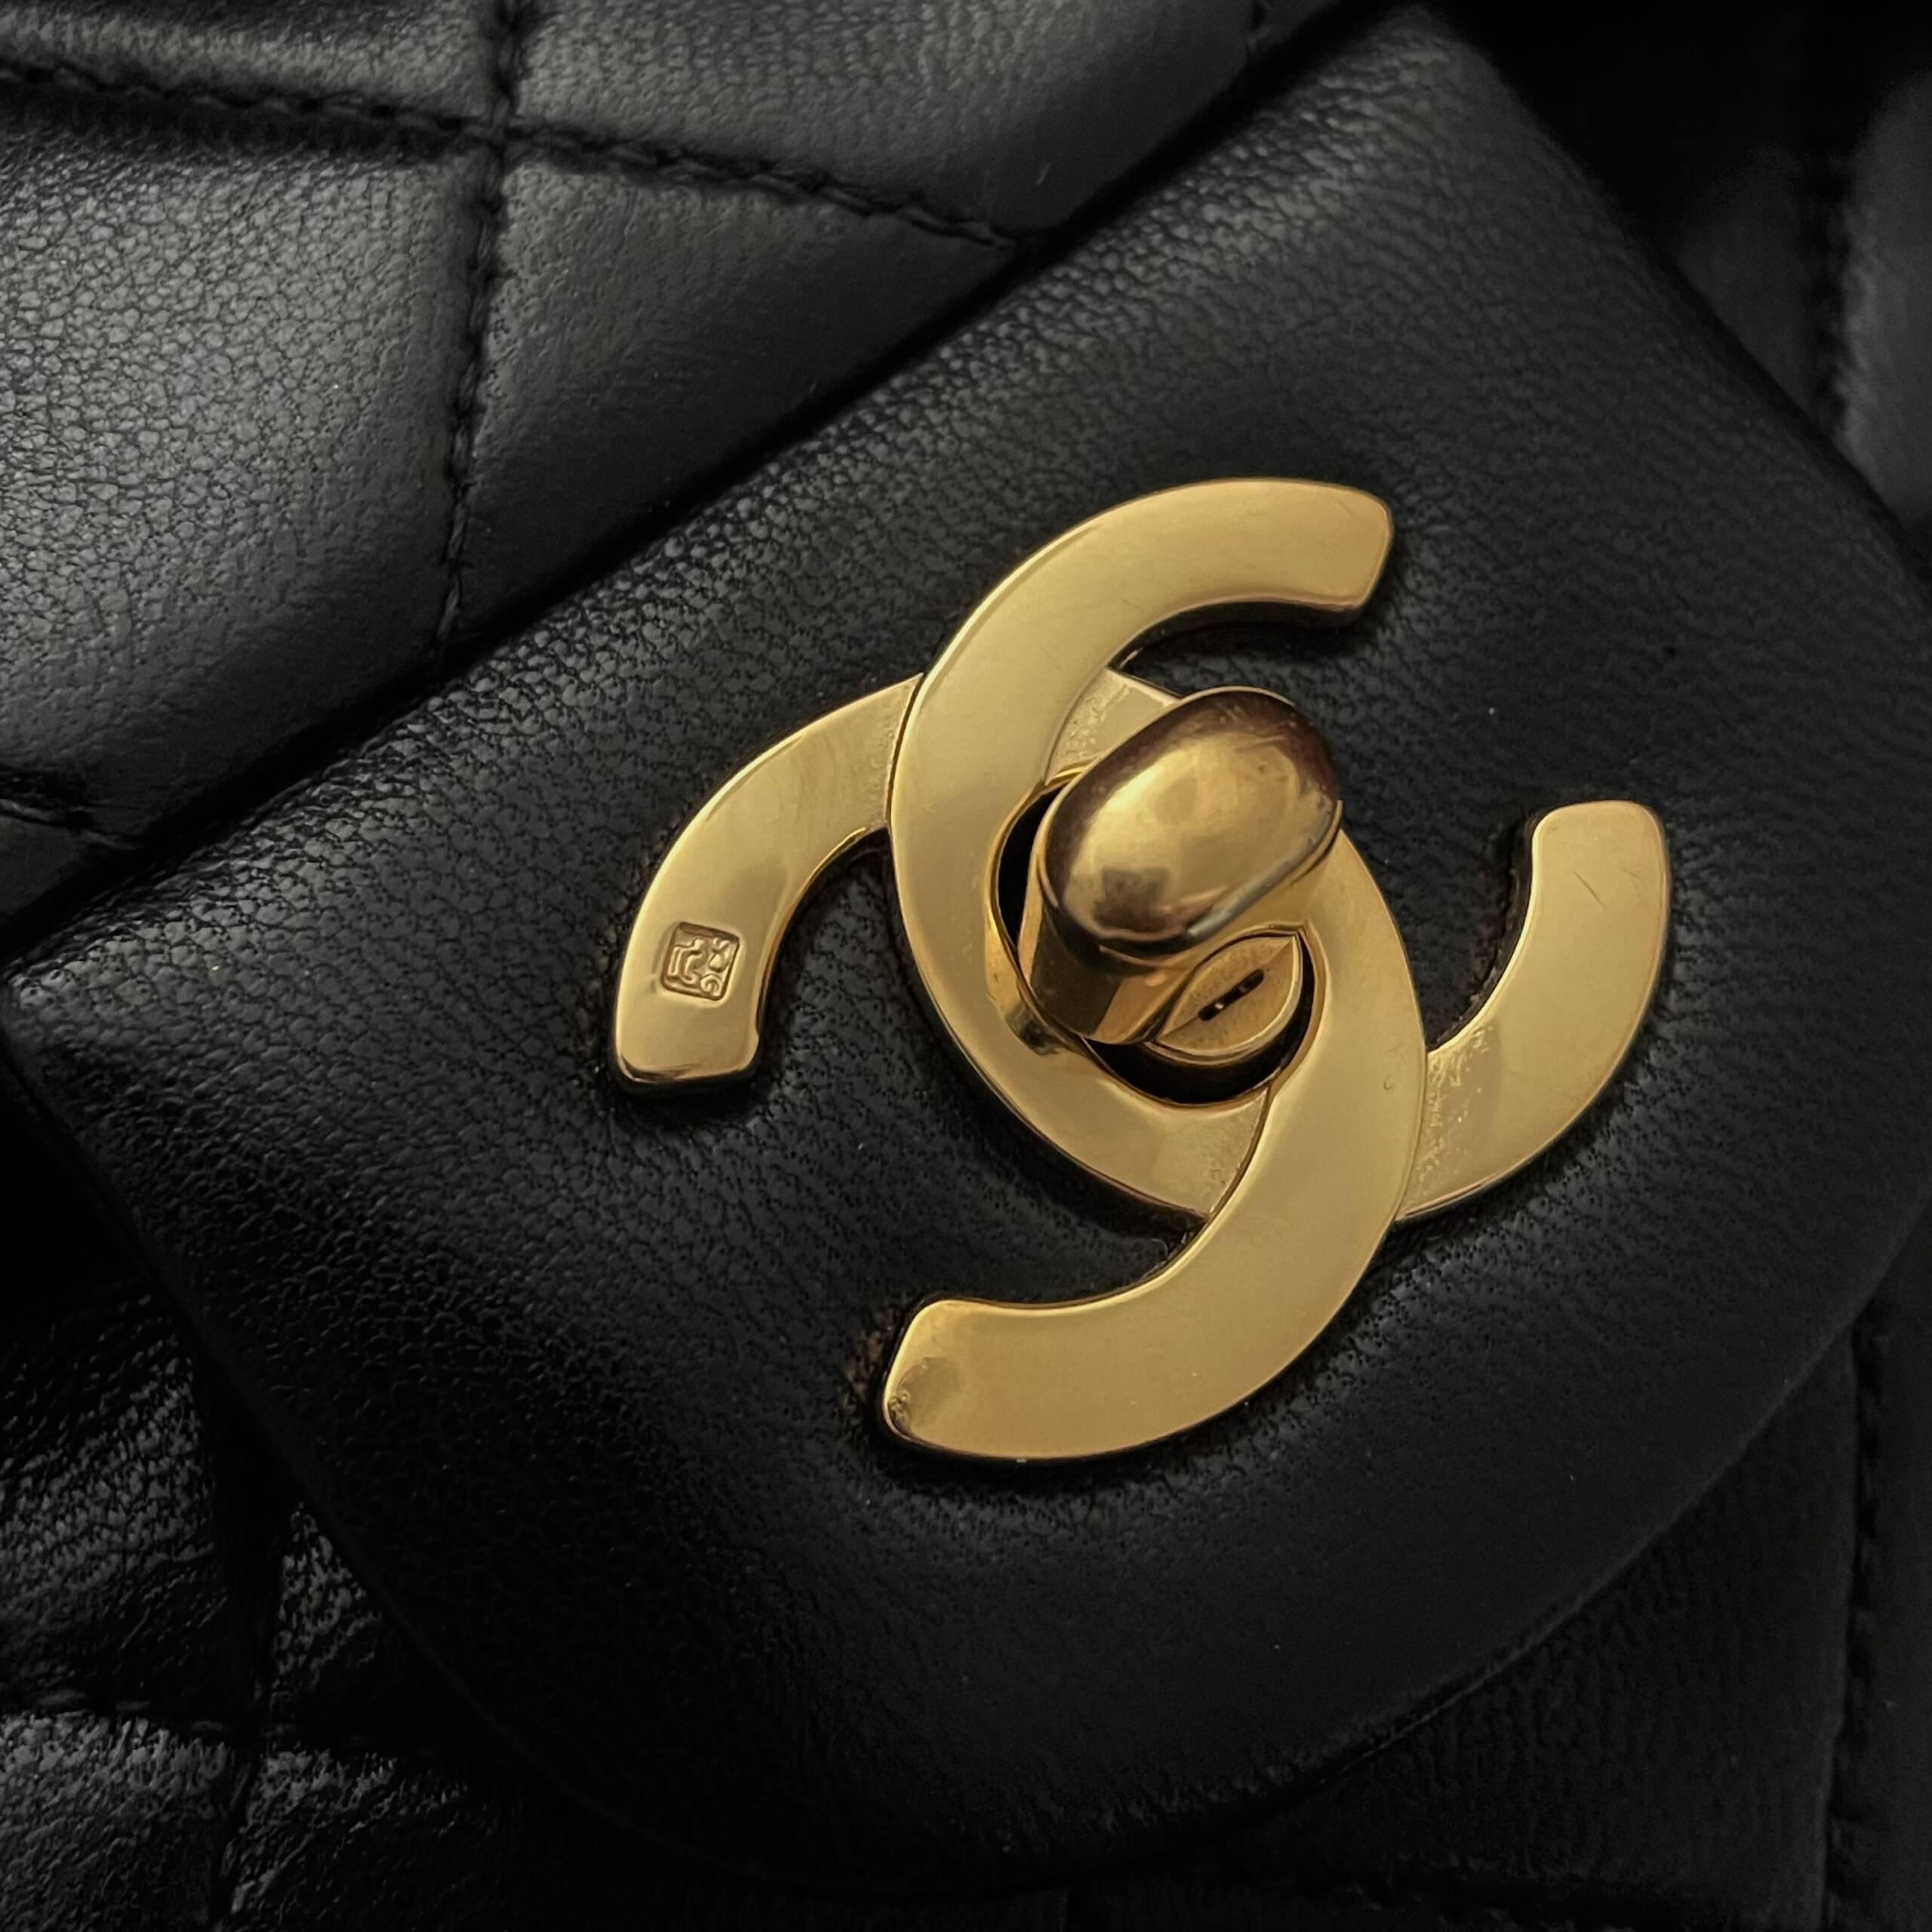 CHANEL Vintage Classic Double Flap Bag Quilted Lambskin Medium Black -  Chelsea Vintage Couture